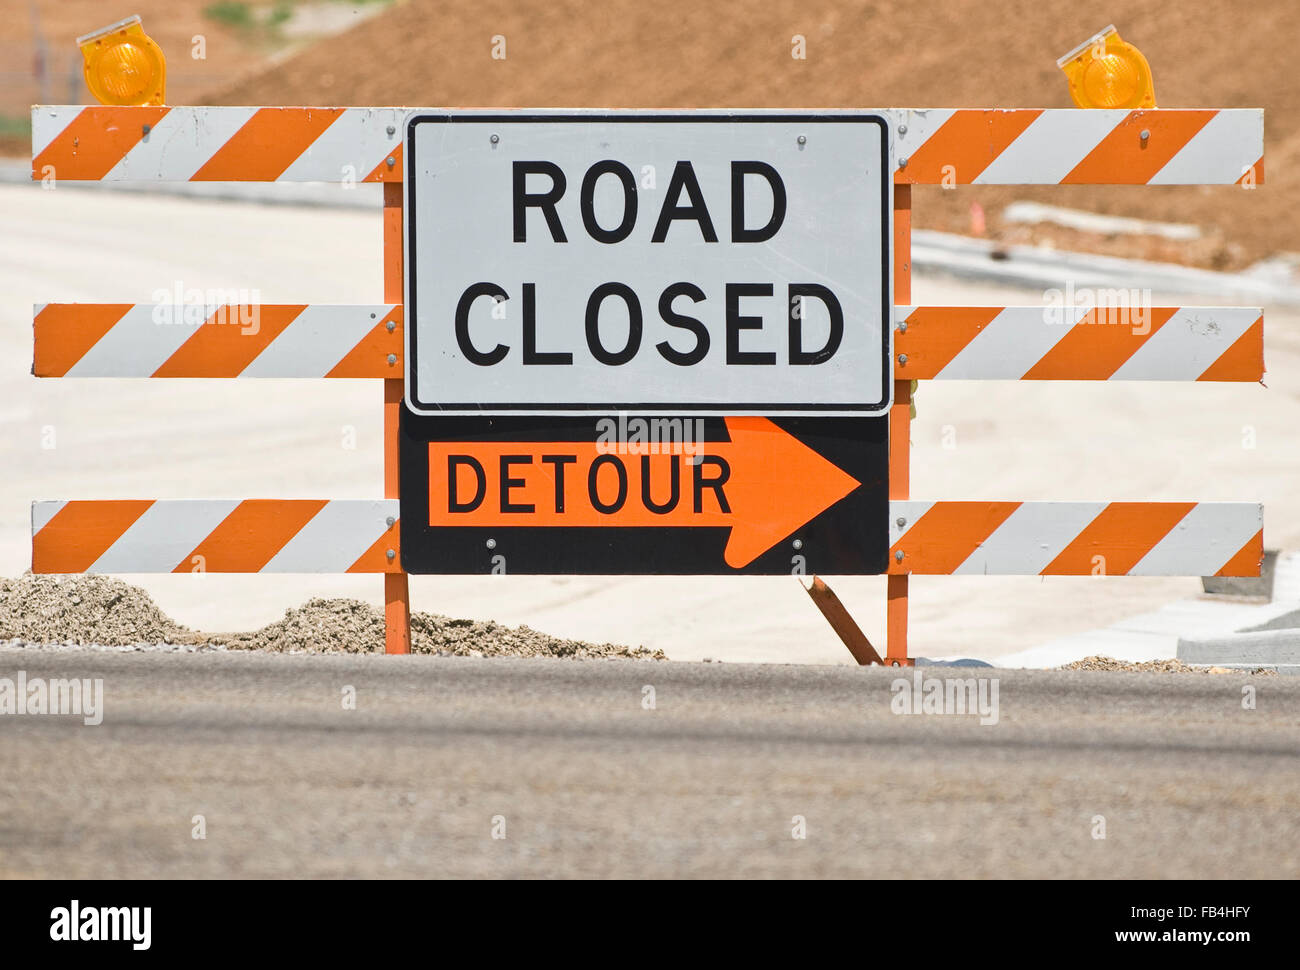 Road Closed / Detour Barrier Sign Stock Photo